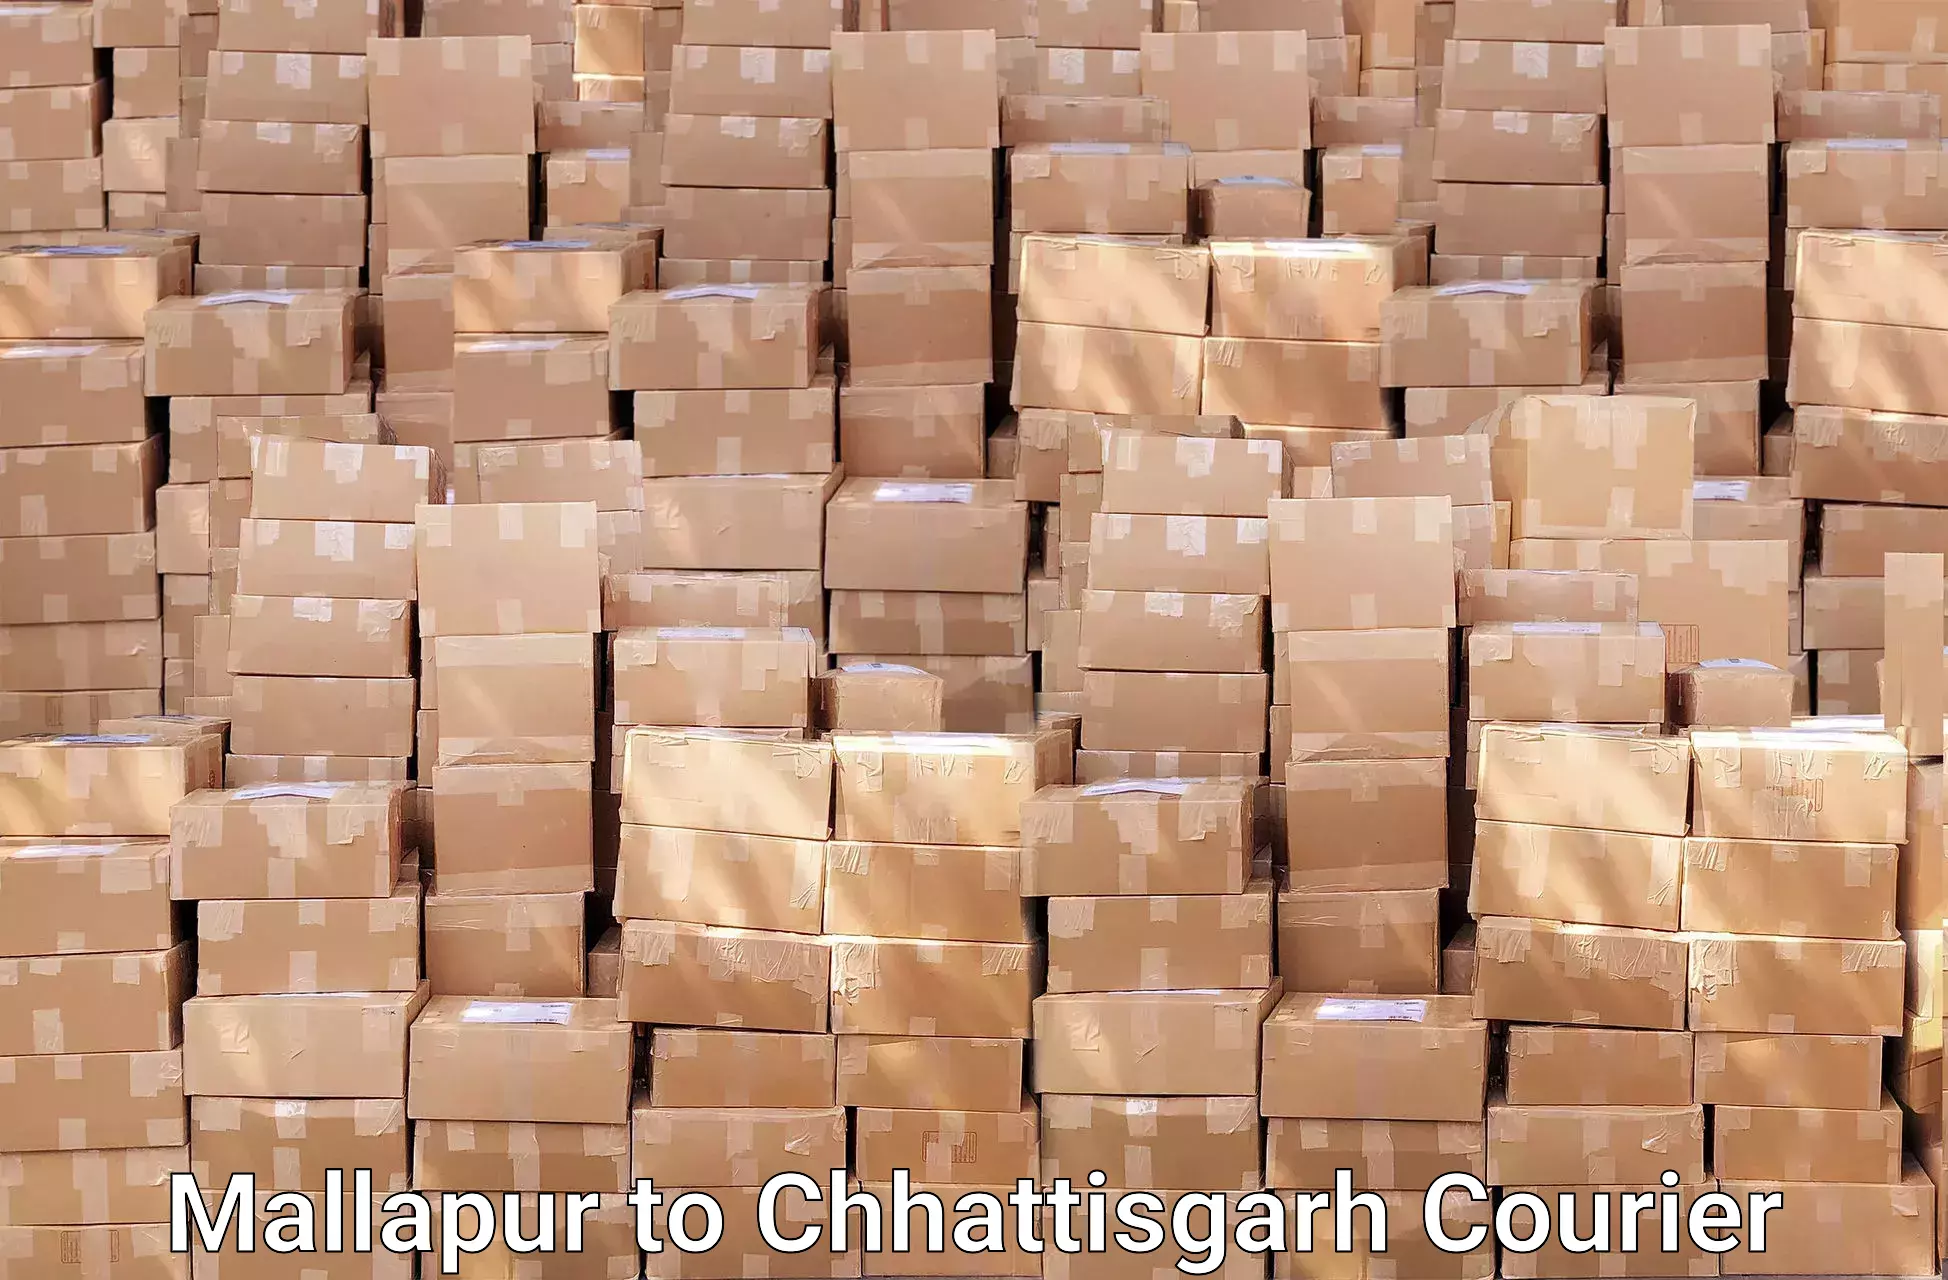 Packing and moving services Mallapur to Patna Chhattisgarh